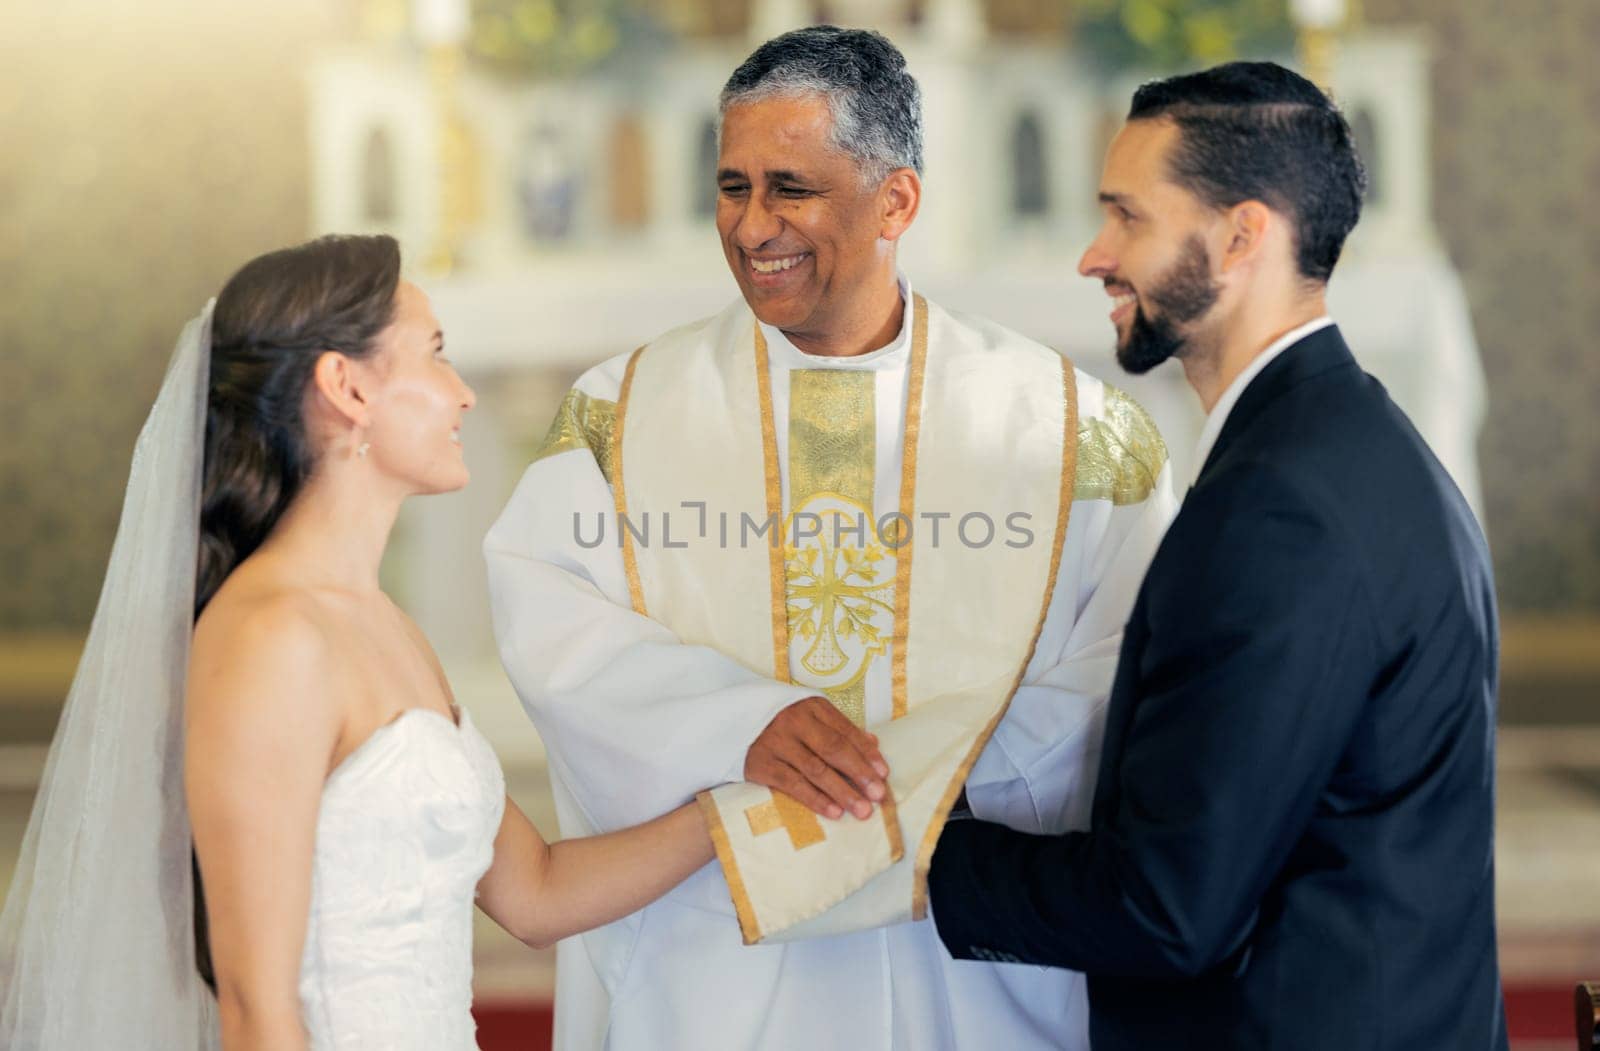 Wedding, priest and couple holding hands in church for a christian marriage oath and faithful commitment. Trust, bride and happy groom with a supportive pastor helping them make a holy love promise.